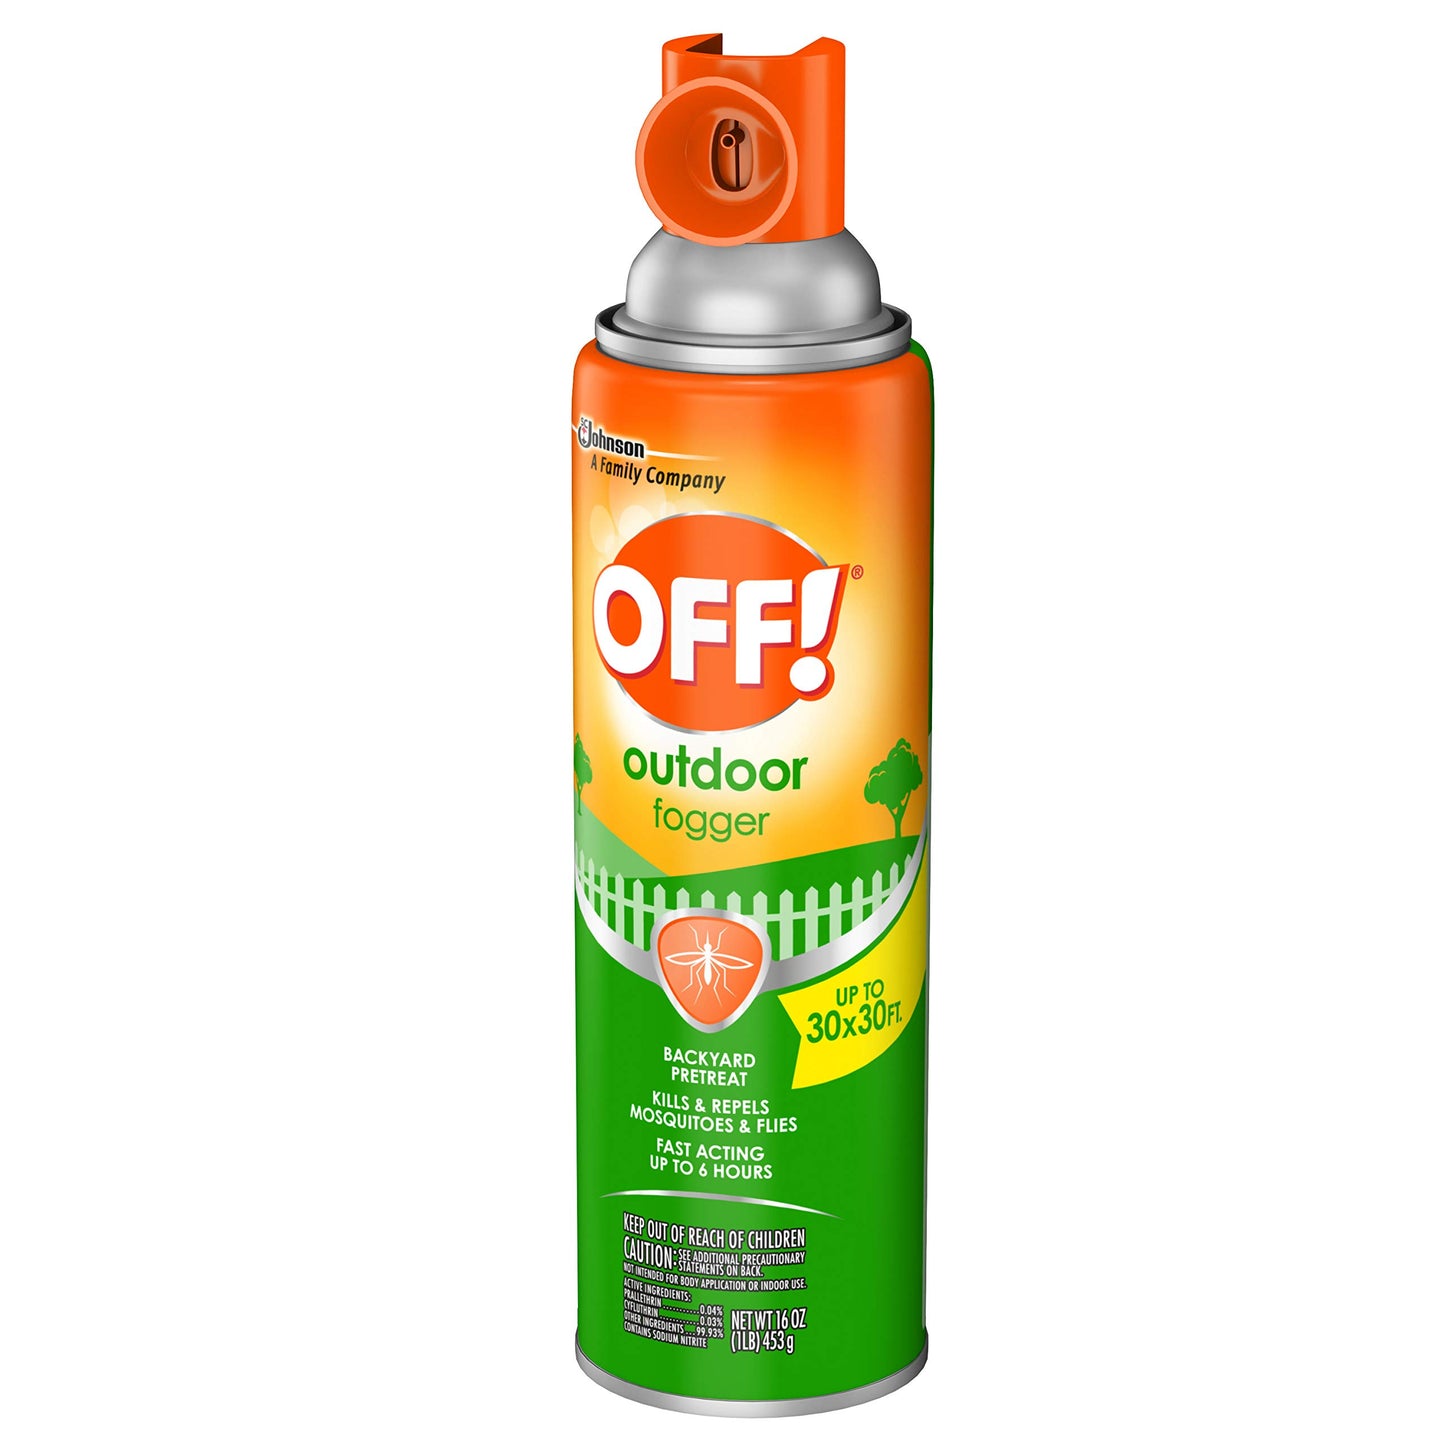 OFF! Outdoor Fogger, 16 OZ Mosquito and Fly Repellant (Pack - 3)